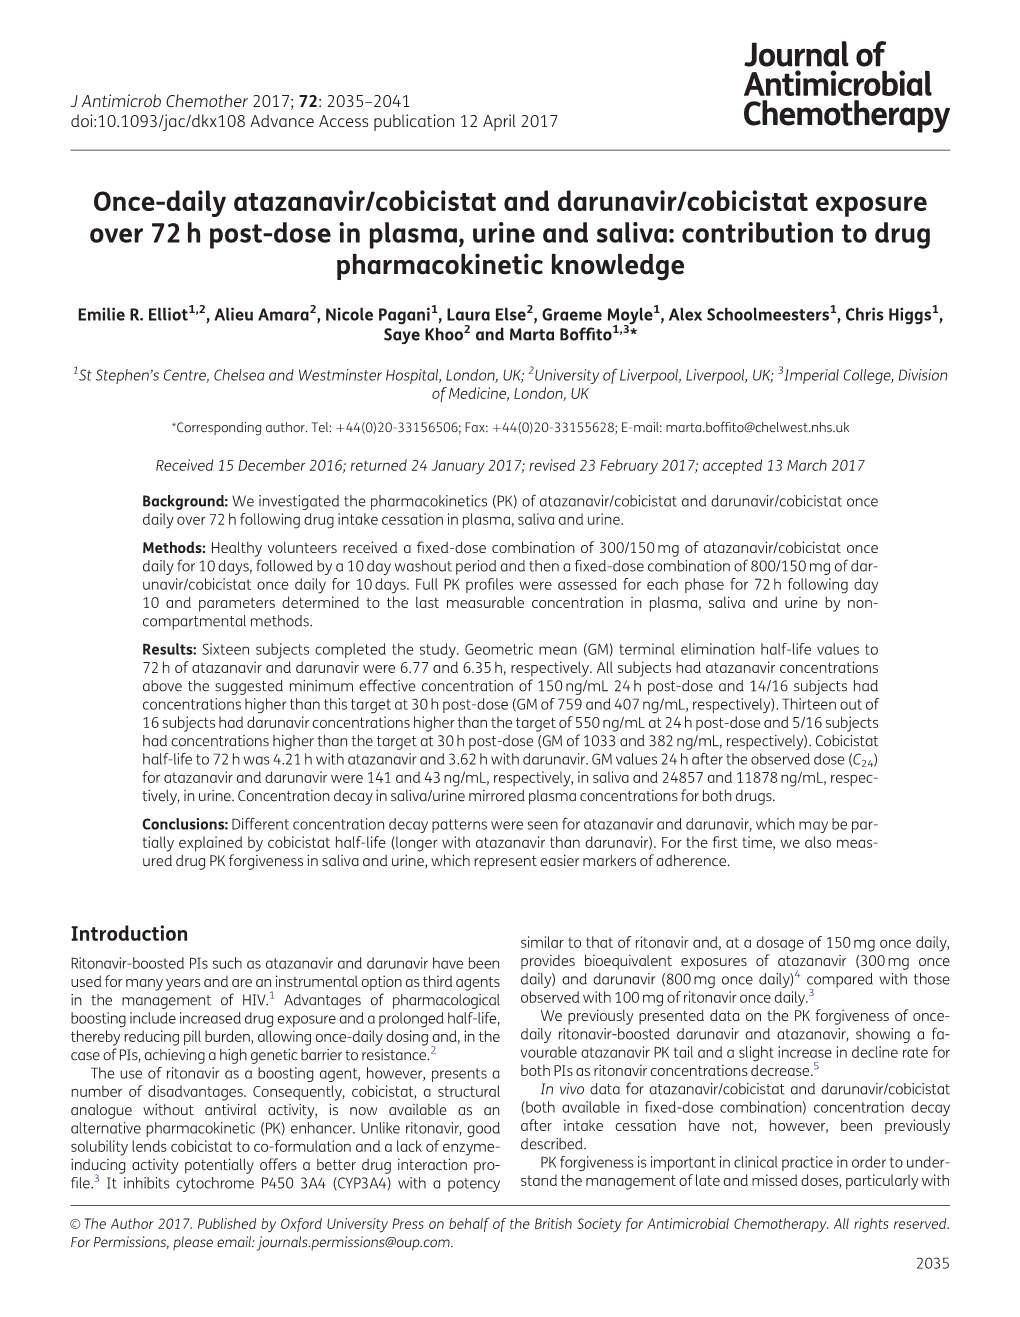 Once-Daily Atazanavir/Cobicistat and Darunavir/Cobicistat Exposure Over 72 H Post-Dose in Plasma, Urine and Saliva: Contribution to Drug Pharmacokinetic Knowledge